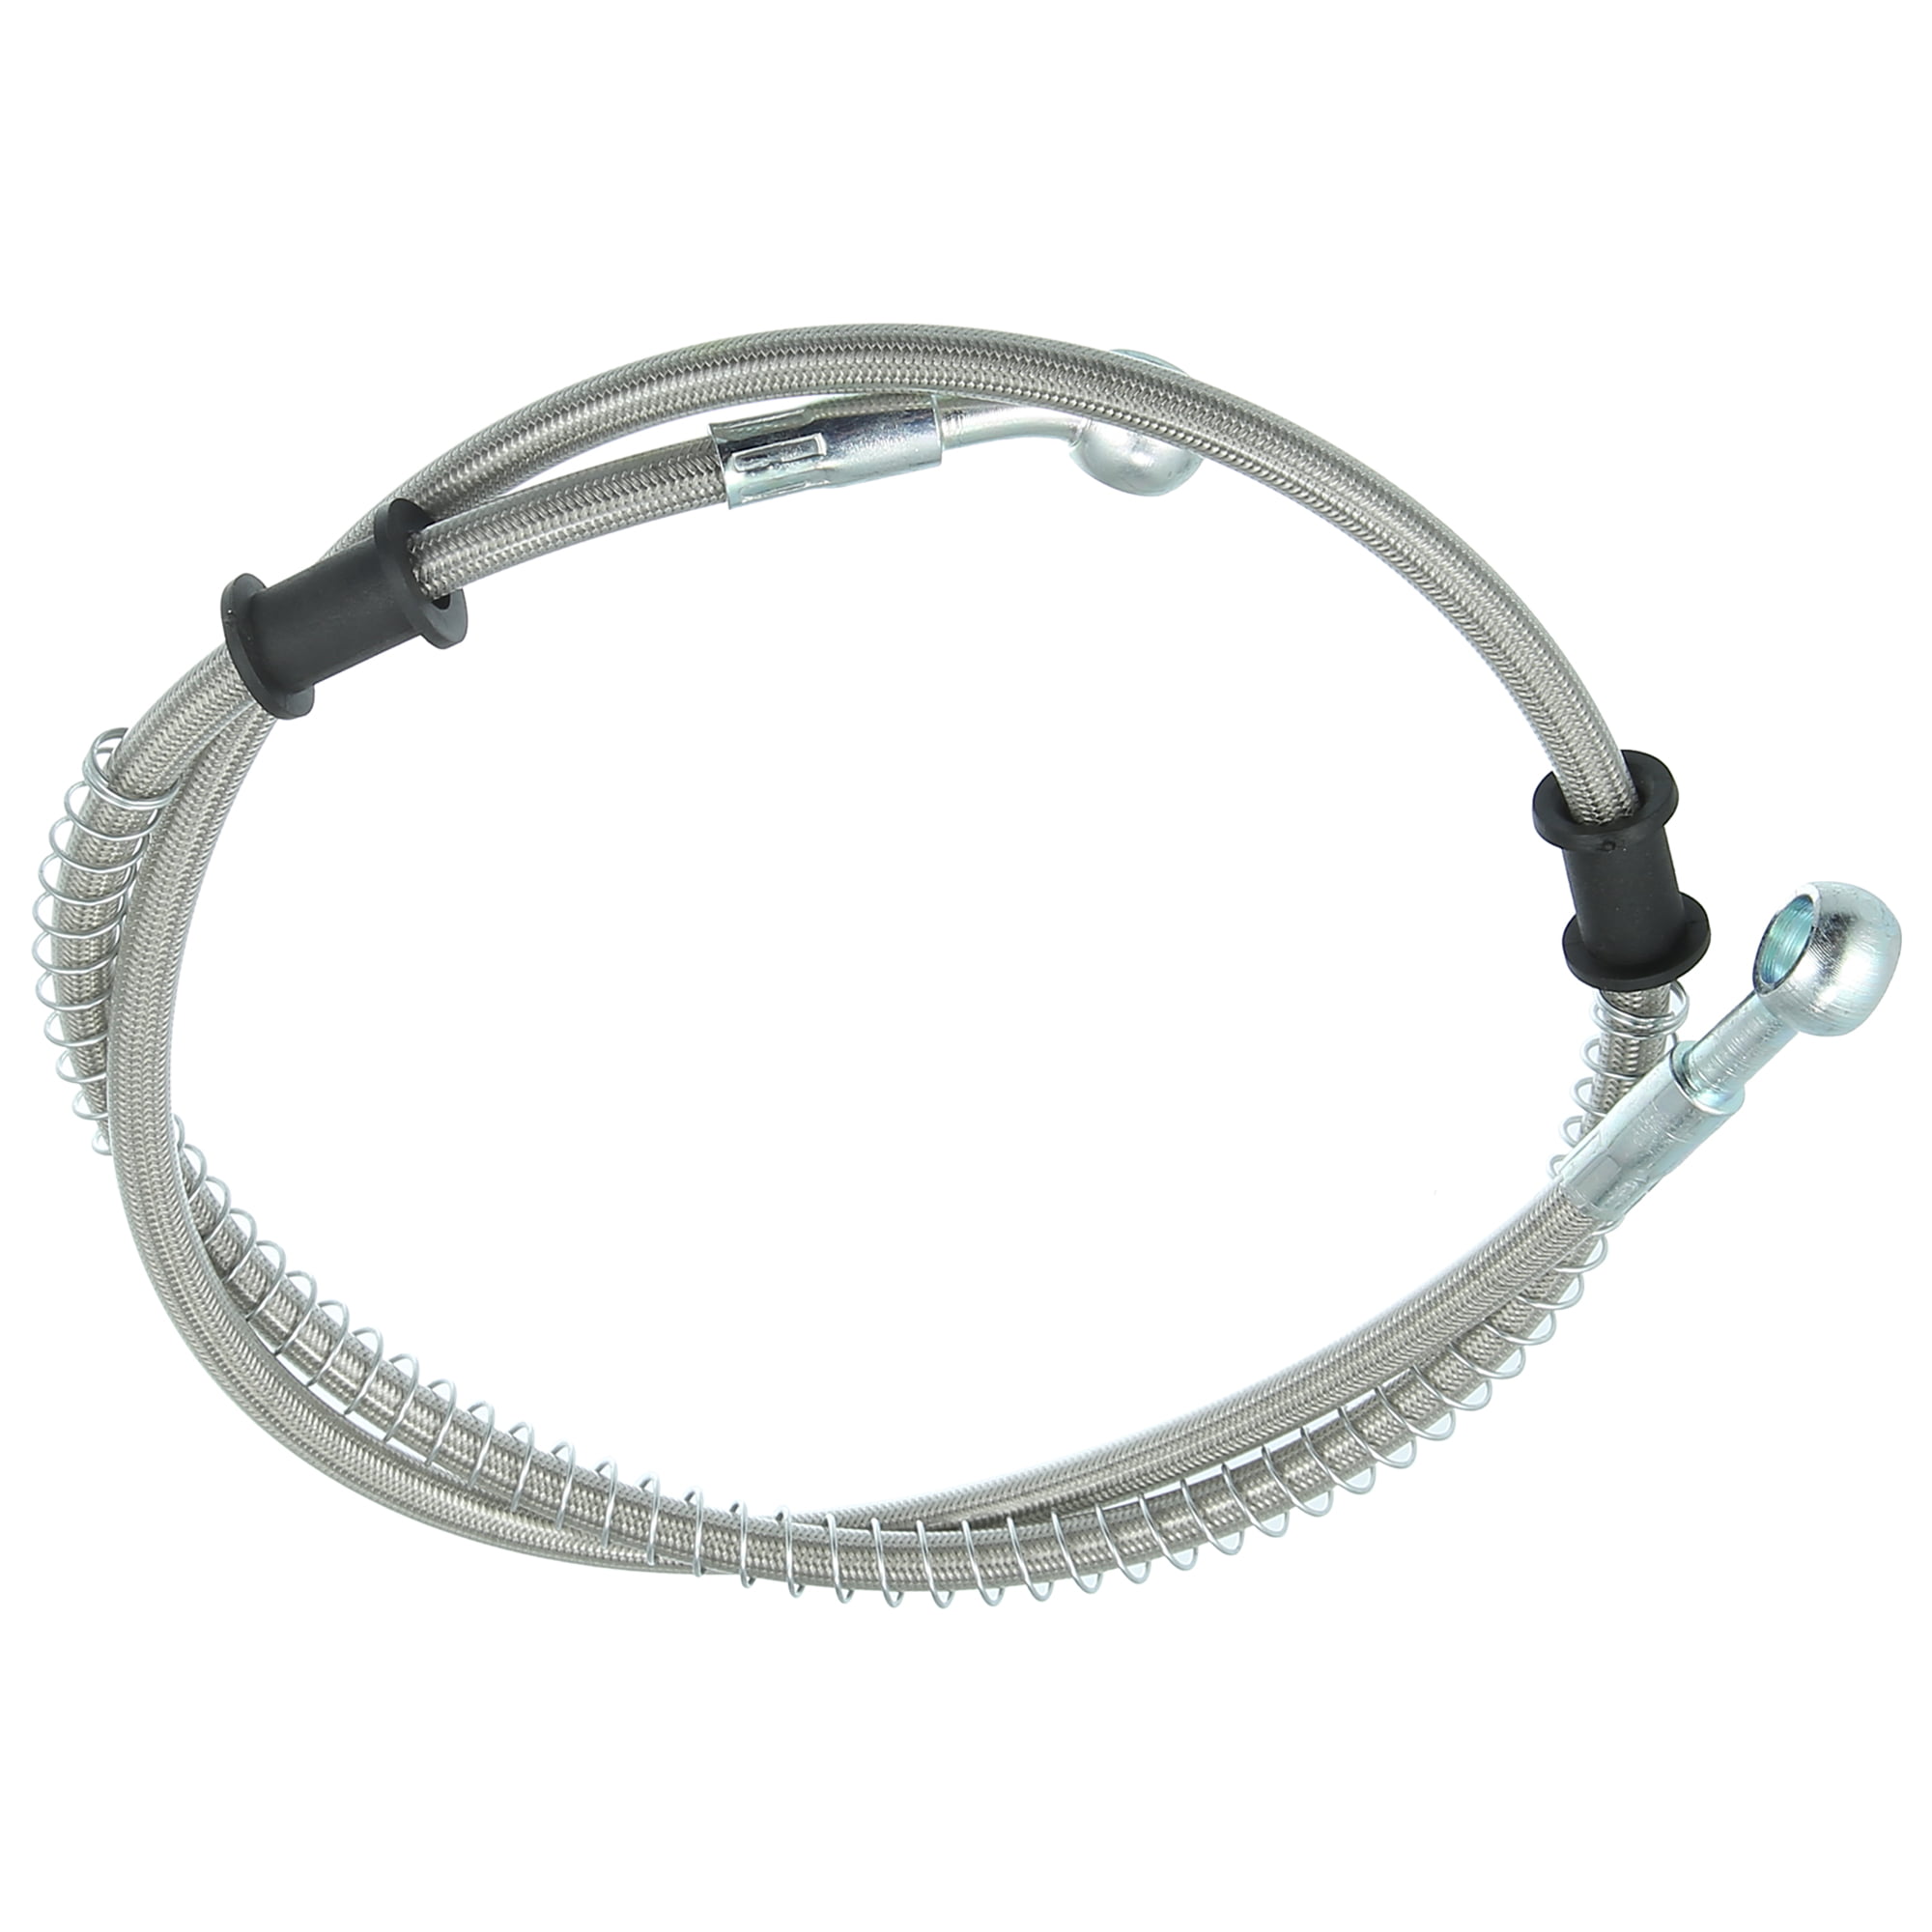 Motoforti 100cm 39.37 10mm Motorcycle Braided Brake Clutch Oil Hoses Line Pipe Clutch Throttle Gas Line Fuel Pipe Silver Tone for ATV Dirt Bike 